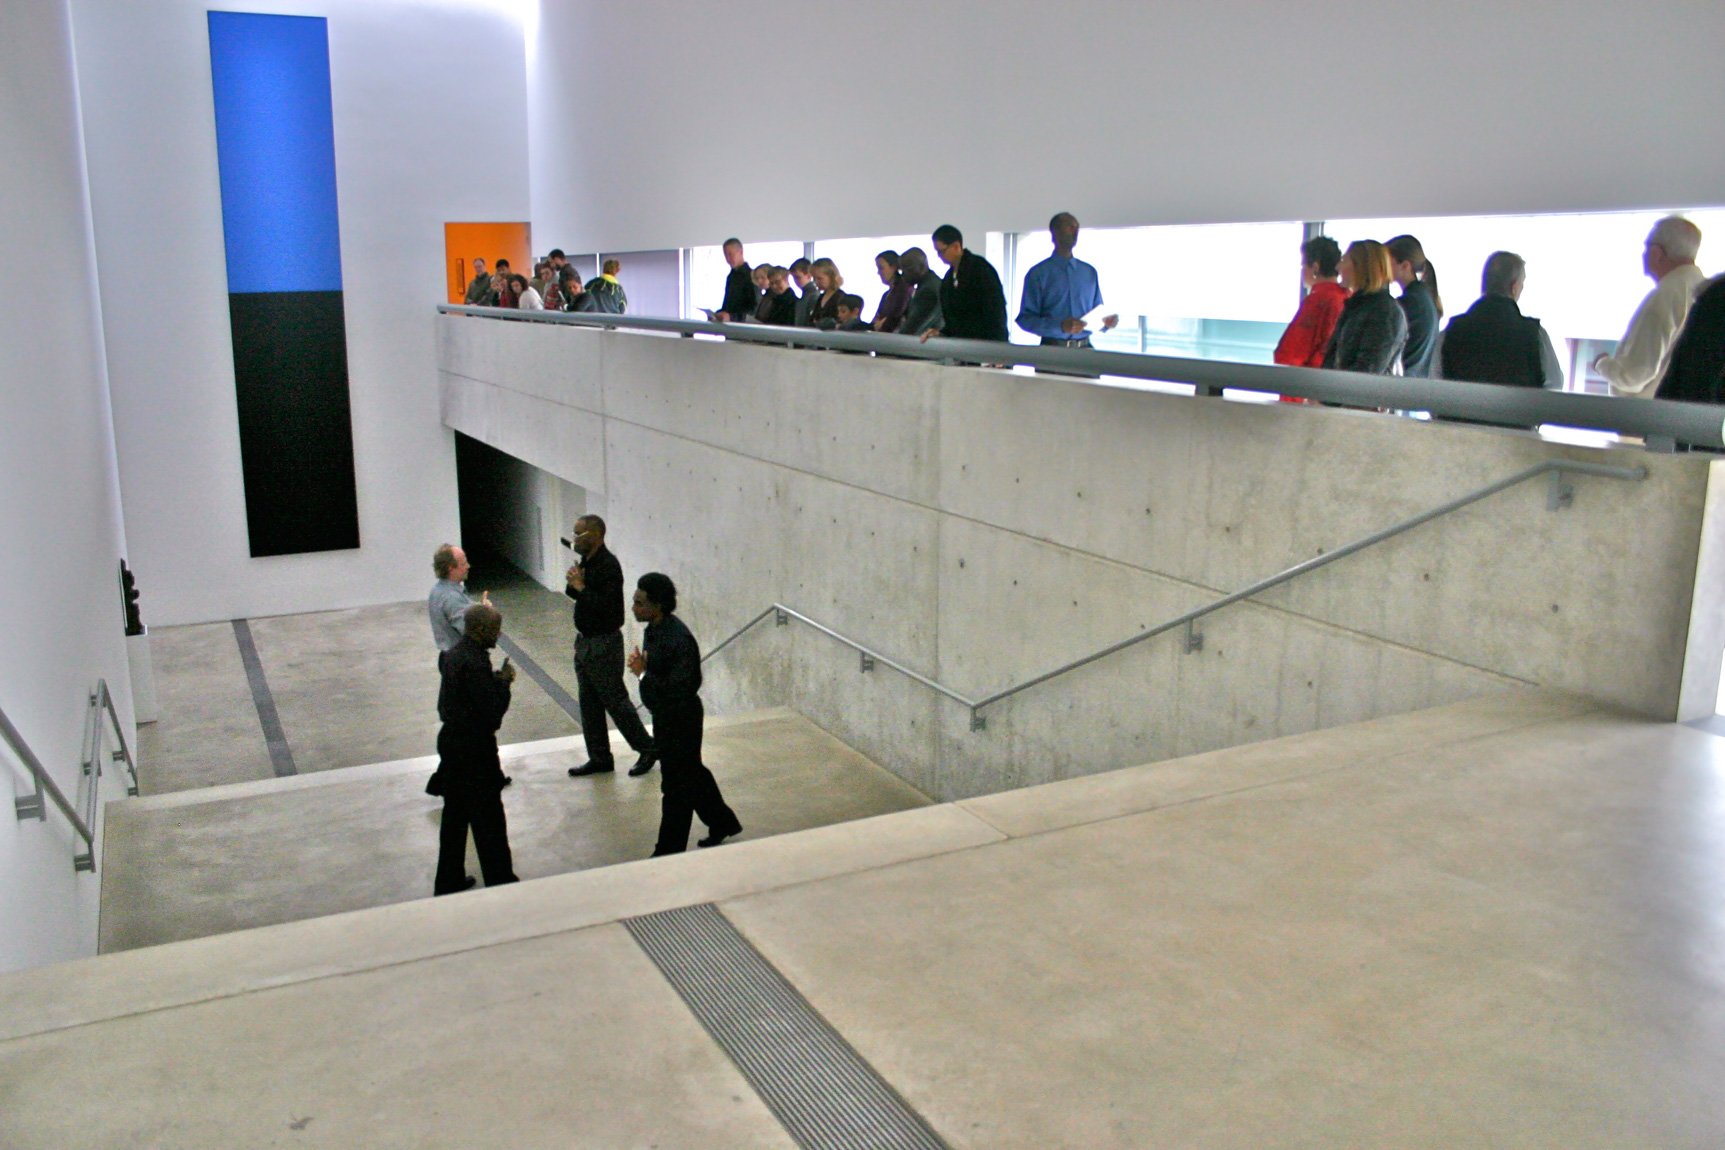 Participants perform on the Main Staircase for guests, who watch from railing above.